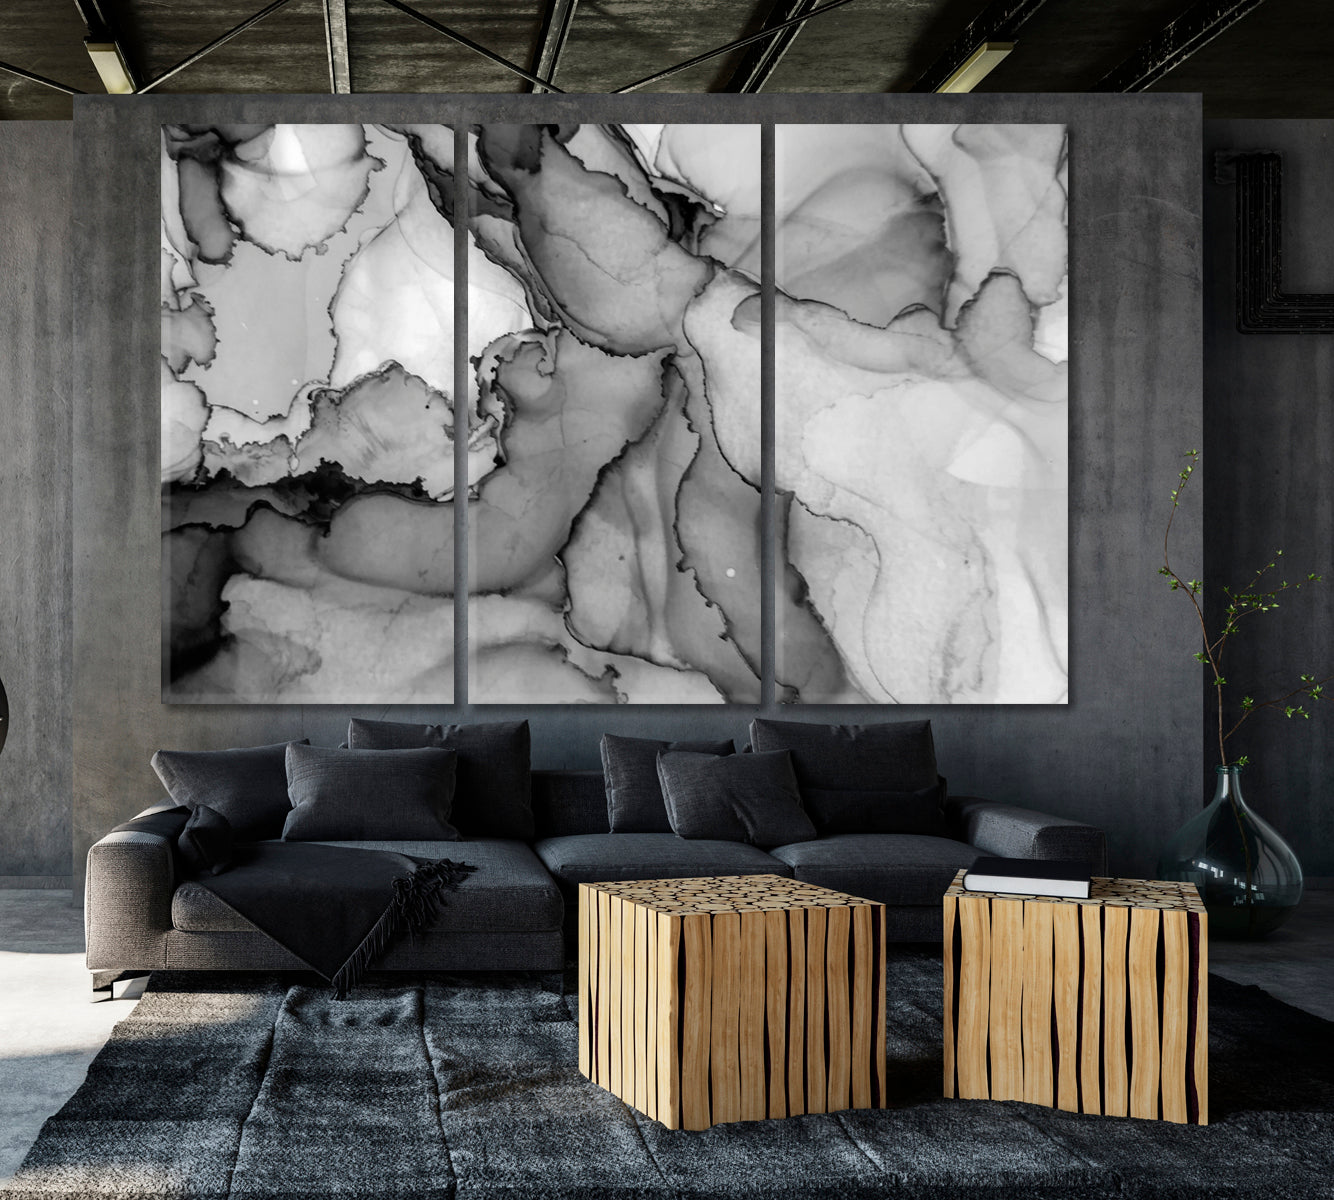 Smoky B & W Alcohol Ink Painting Transparent Marble Artistic Fluid Art, Oriental Marbling Canvas Print Artesty 3 panels 36" x 24" 